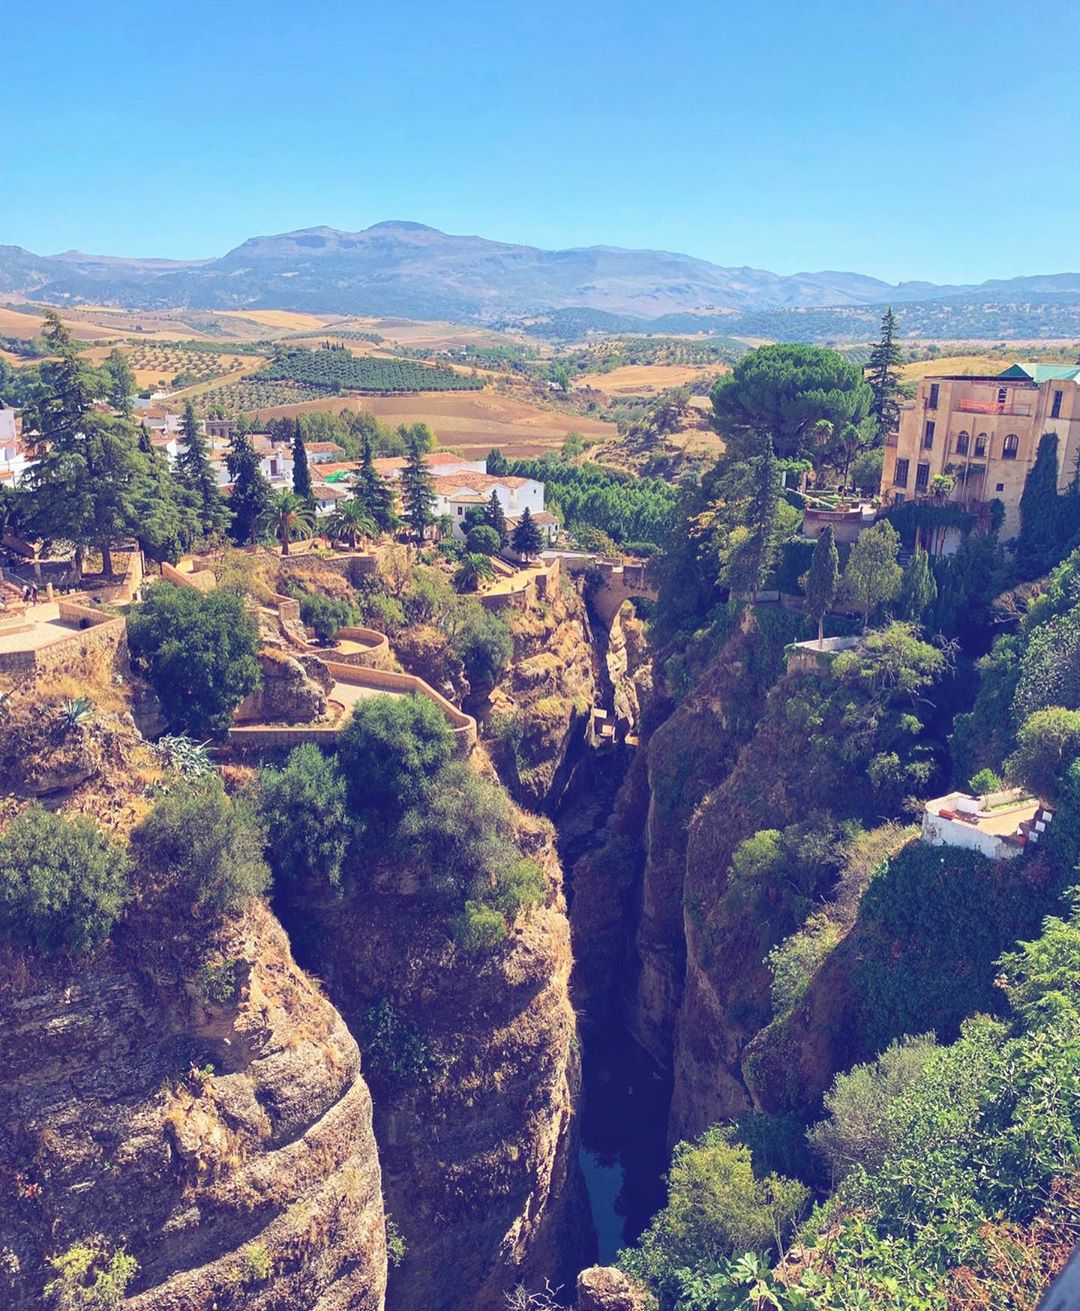 For this week’s #DreamNowGoLater @charlenekendry remembers her time spent exploring Andalucía’s most historical town 🇪🇸💫: ⁣
⁣
‘Ronda is one of the most beautiful cities I’ve ever visited. With unforgettable views over El Tajo gorge, Puente Nuevo literally takes your breath away.’ 🌿⛰⁣
⁣
#ArmChairTravel  #FoxCommsTravel #DreamNowGoLater #Ronda #OneDaySoon ⁣
⁣